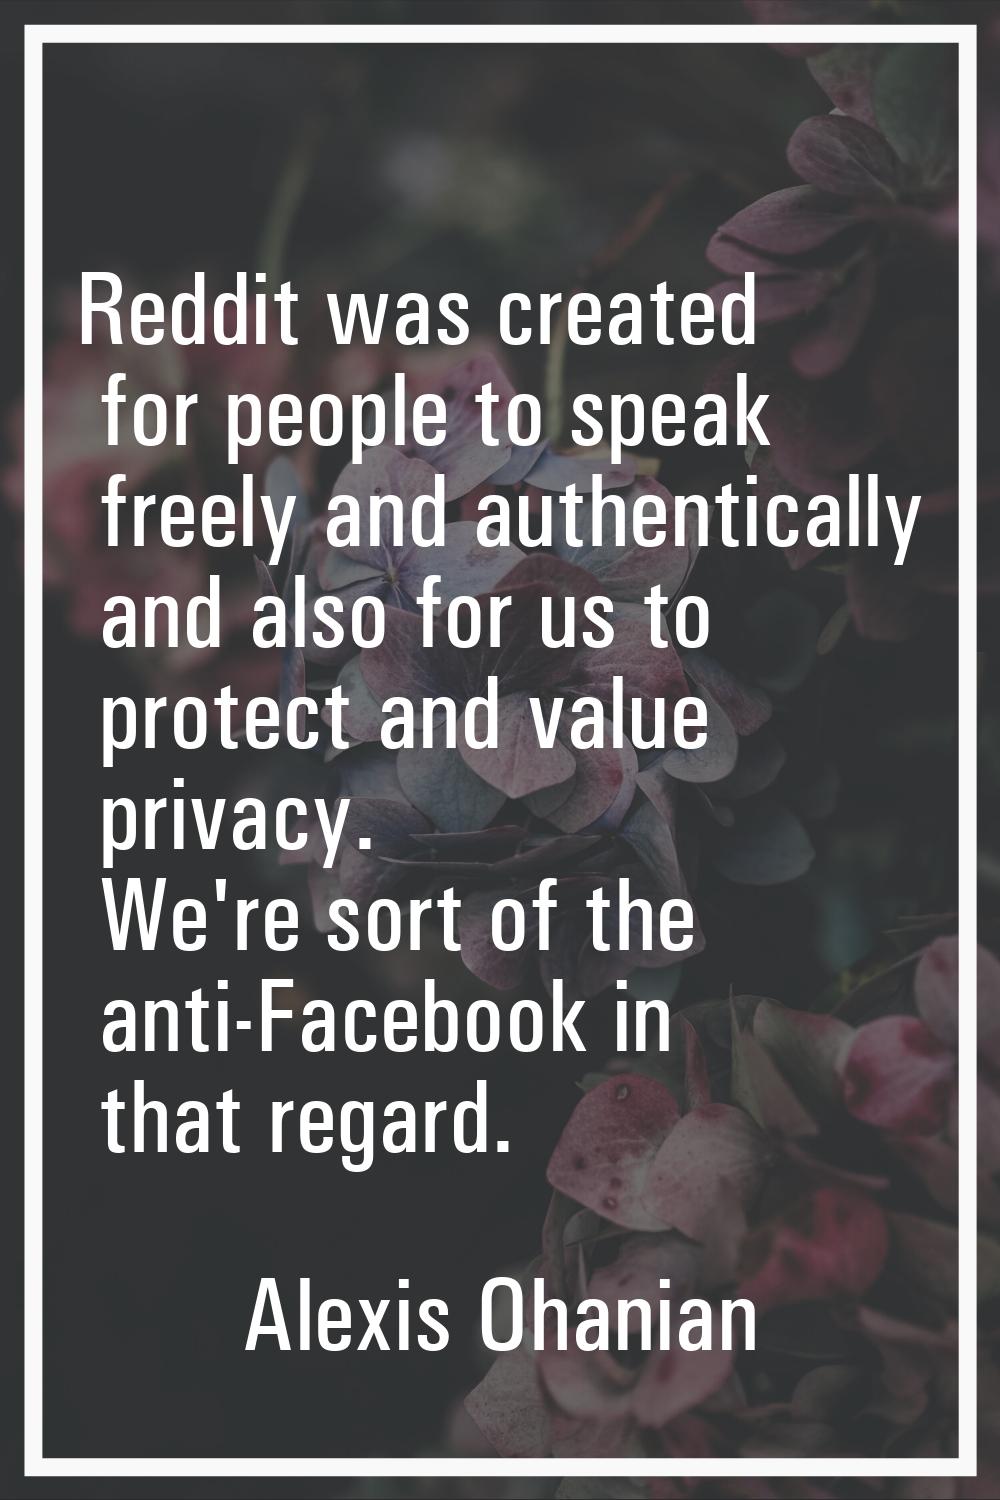 Reddit was created for people to speak freely and authentically and also for us to protect and valu